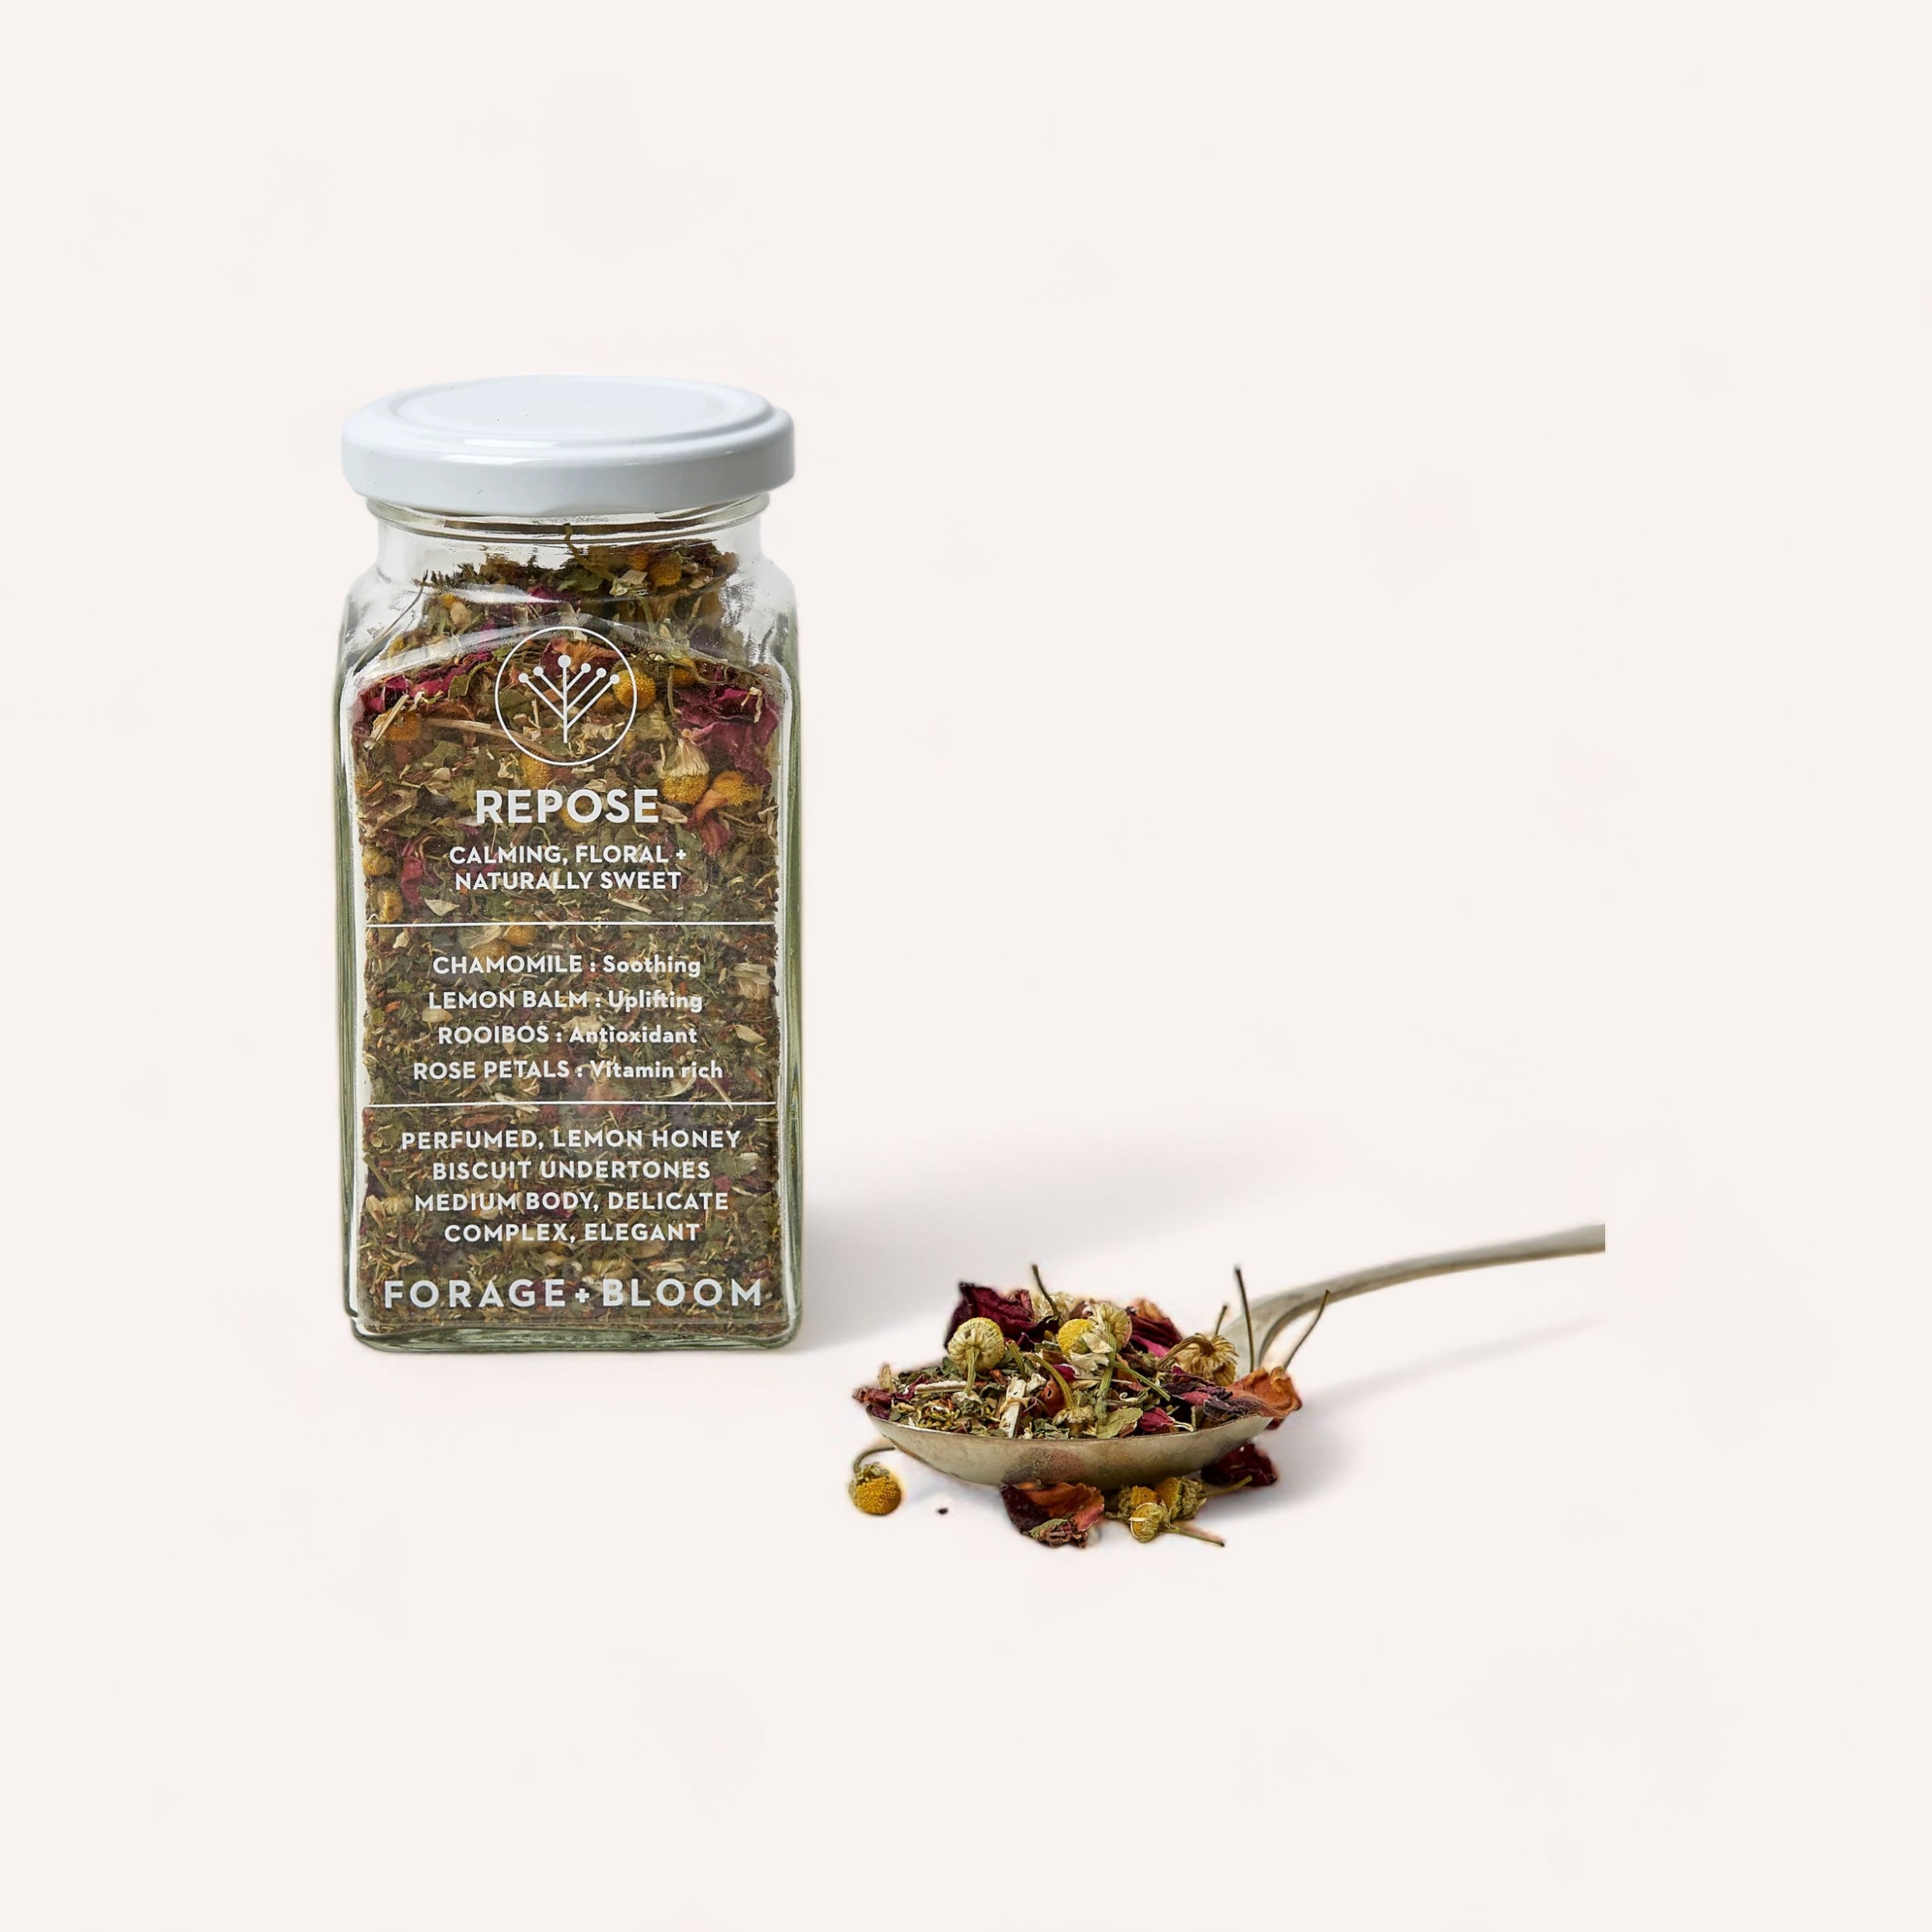 A jar of Repose Tea by Forage + Bloom, with loose tea ingredients artistically scattered in front, symbolizing relaxation and natural wellness.